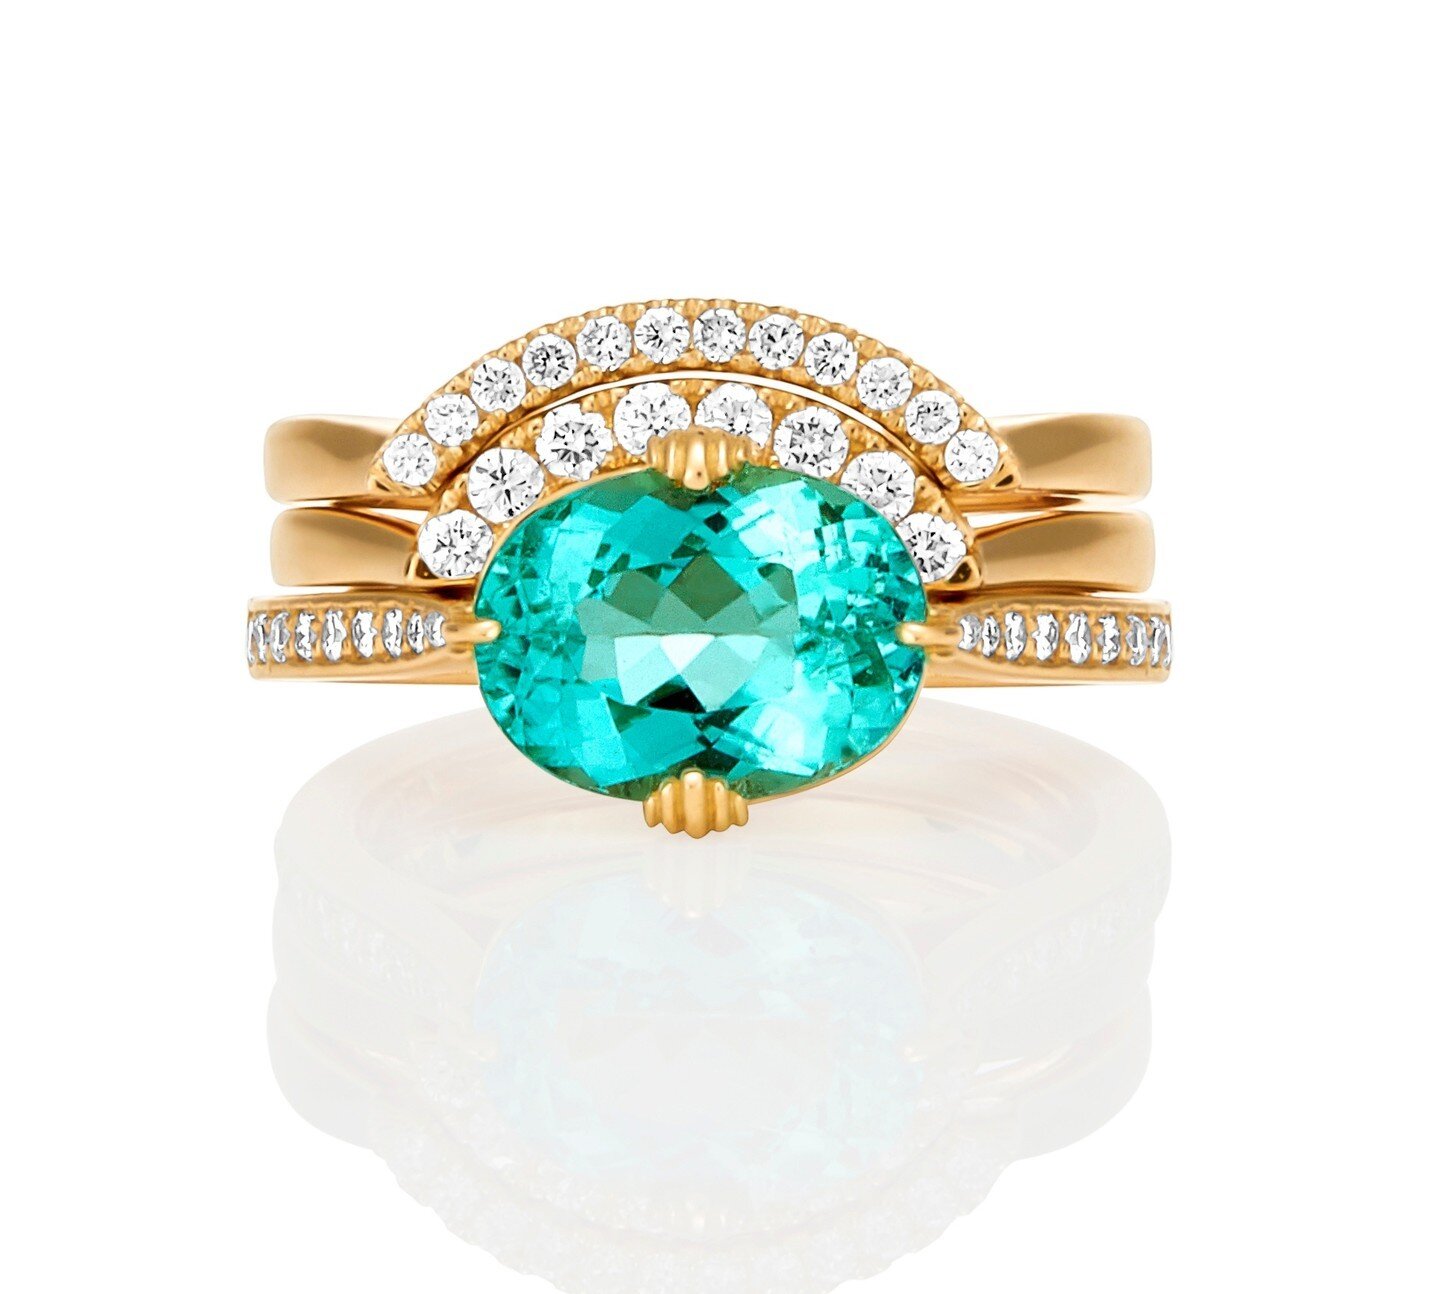 This ring was made to symbolize both the beauty of the Ocean and Surf and New York City. The center stone is an Oval-cut Paraiba Tourmaline from Brazil. Its colour is found in no other gemstone and evokes the stunning colours of pristine ocean water.